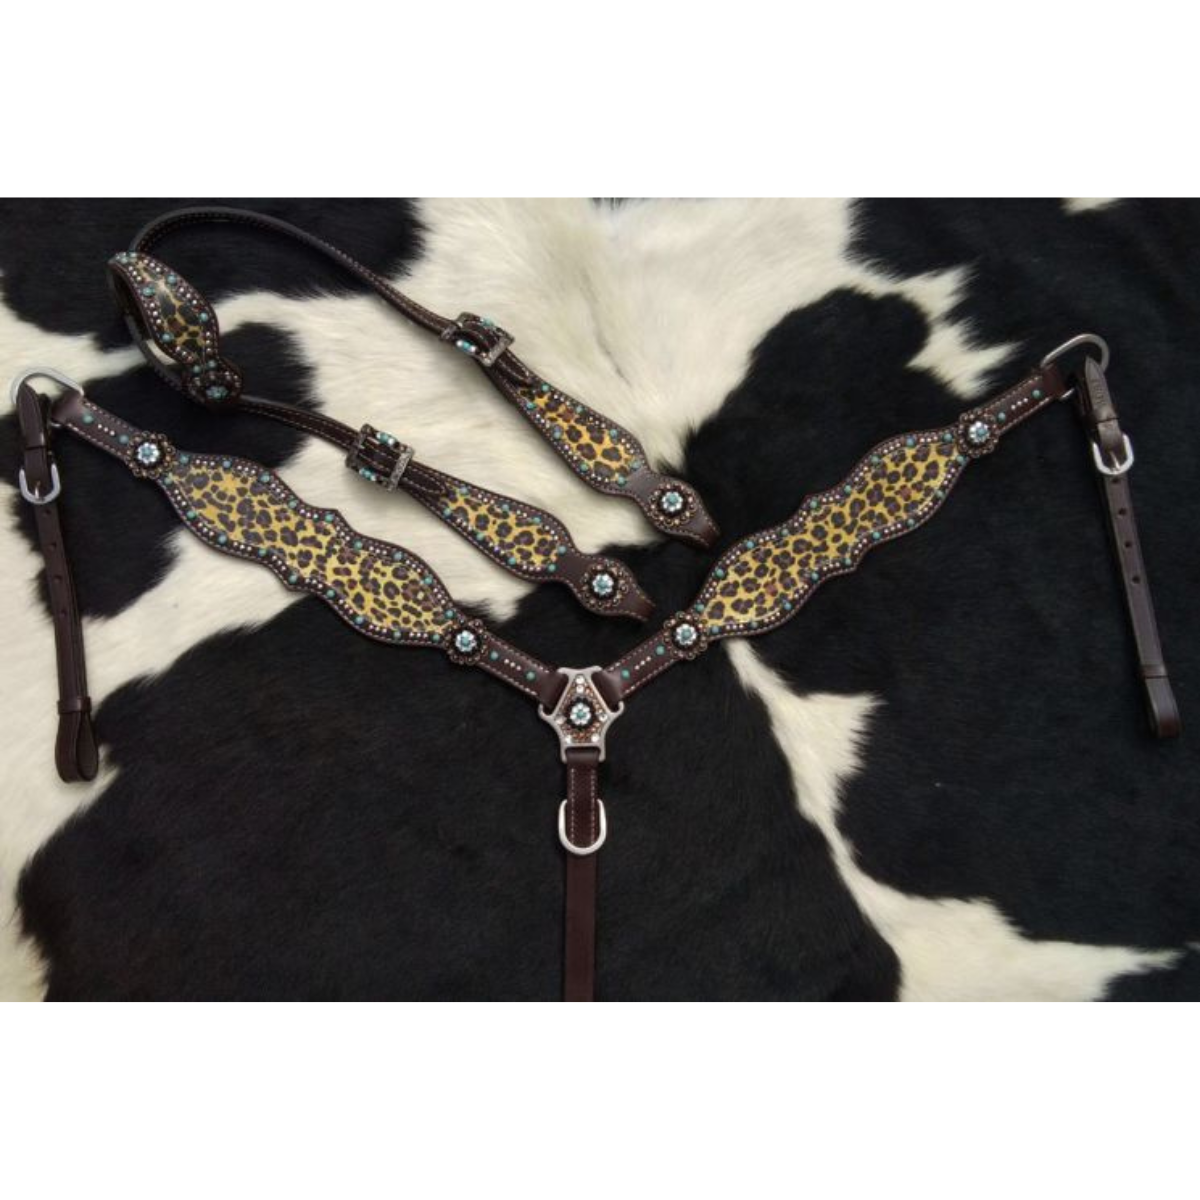 Showman ® Cheetah print one ear headstall and breast collar set with turquoise accents. - Double T Saddles